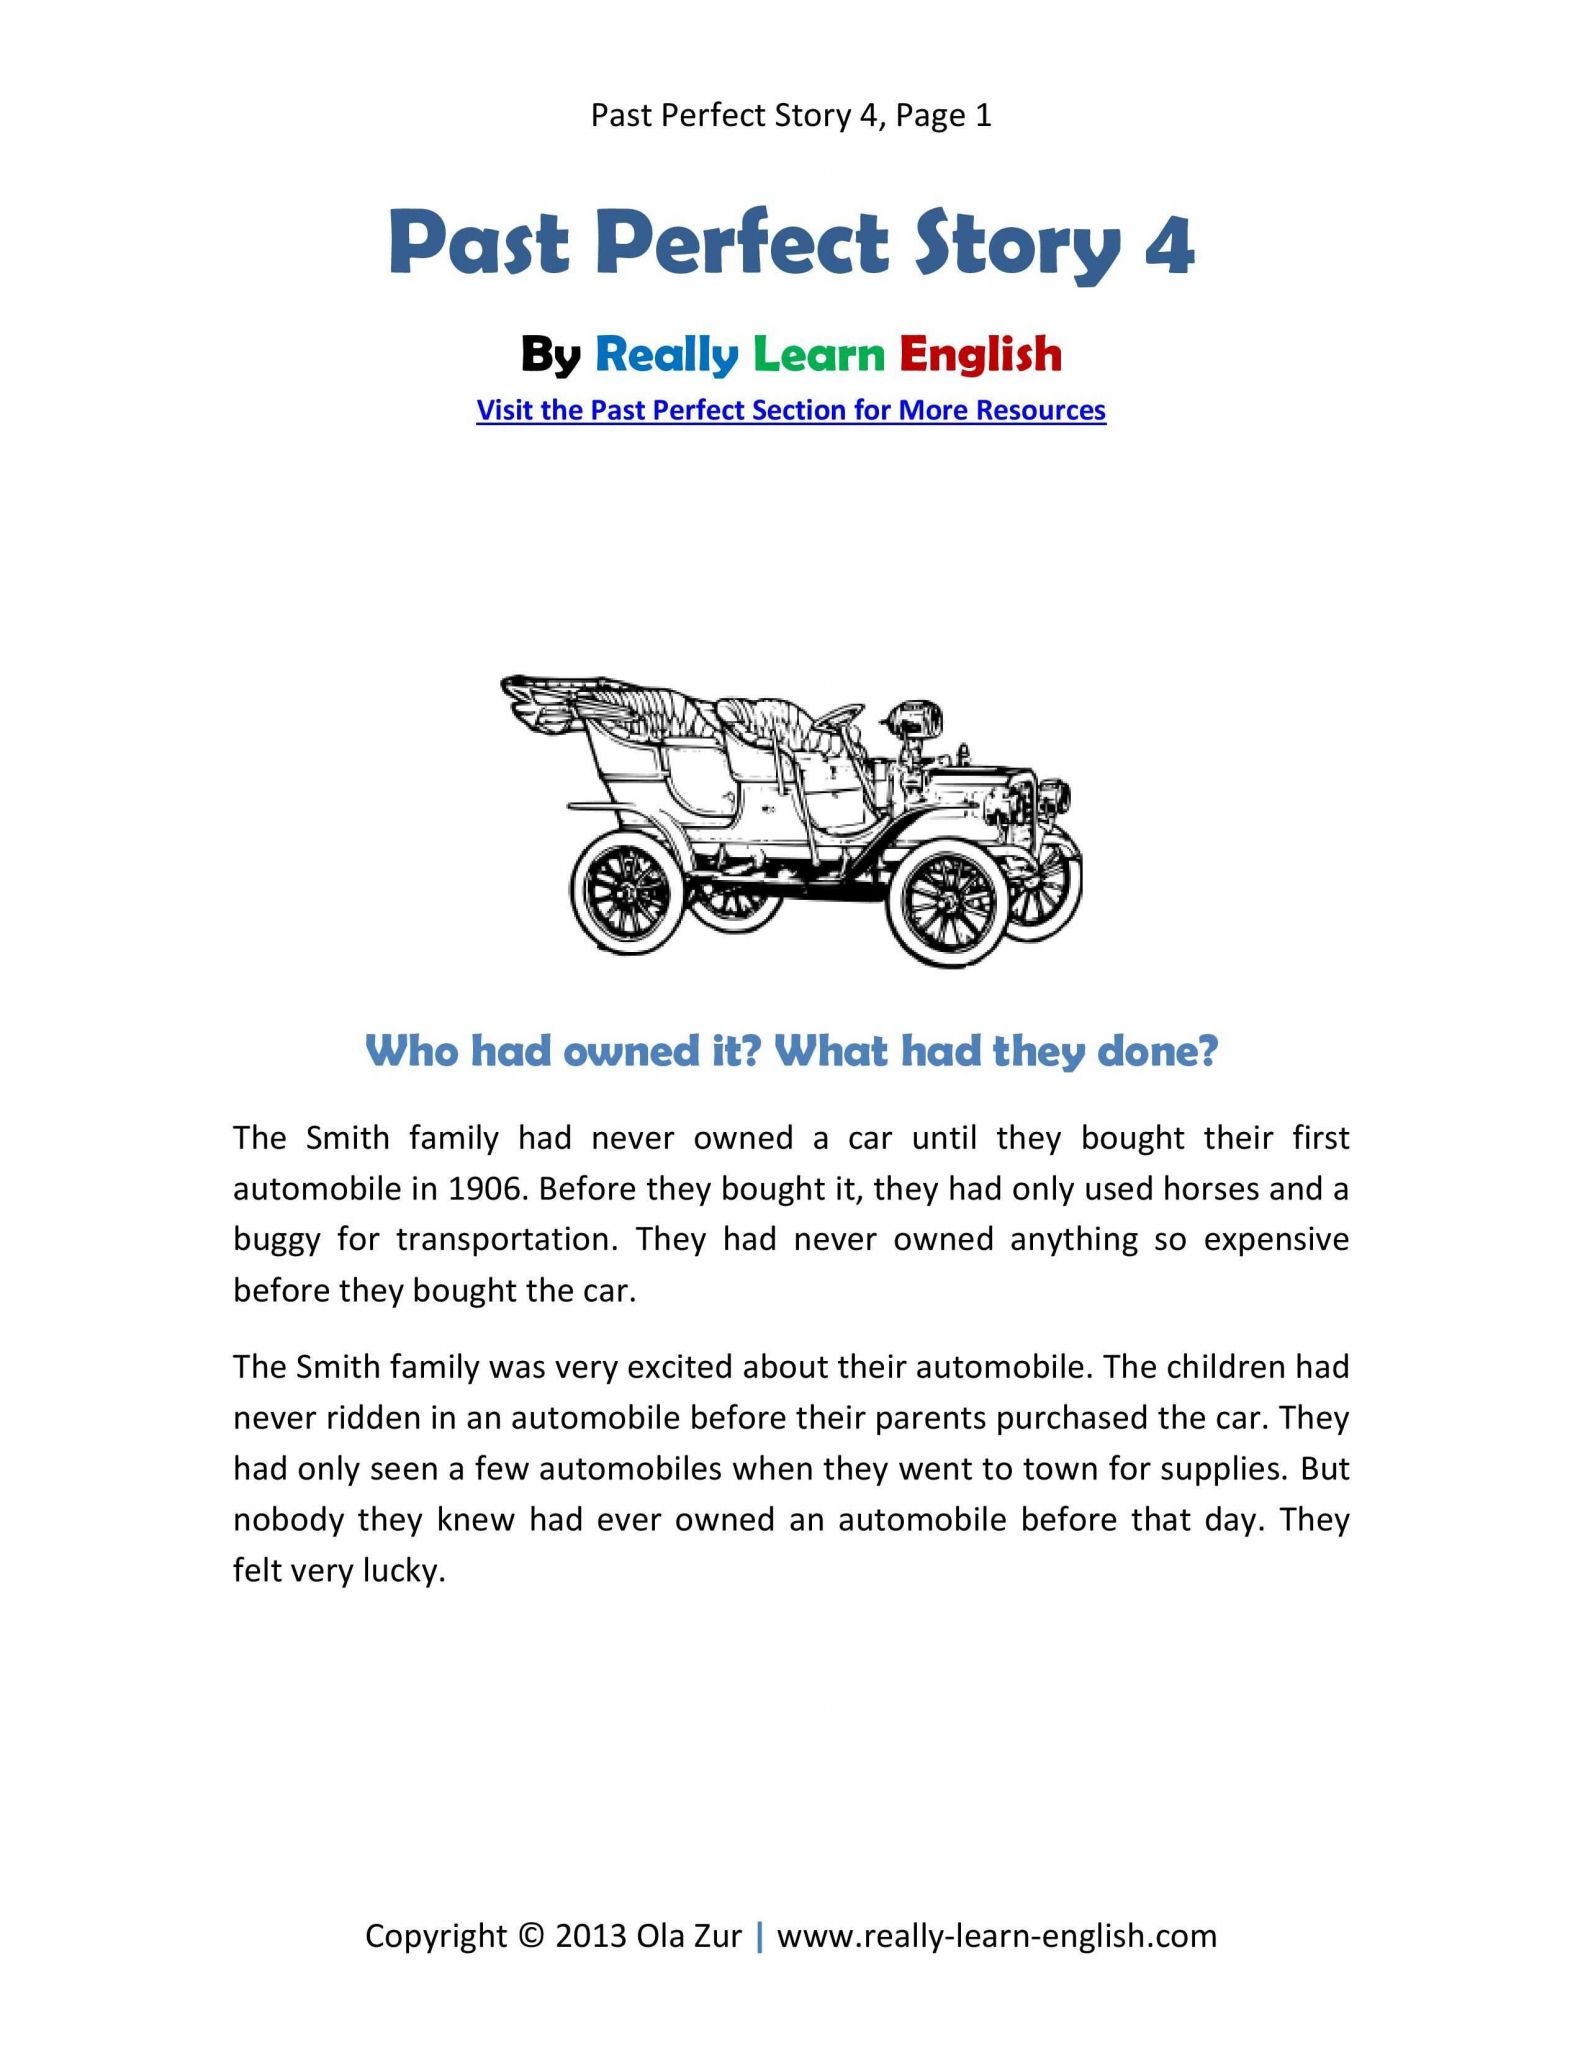 Paragraph Correction Worksheets Pdf as Well as Free Printable Story and Worksheets to Practice the English Past